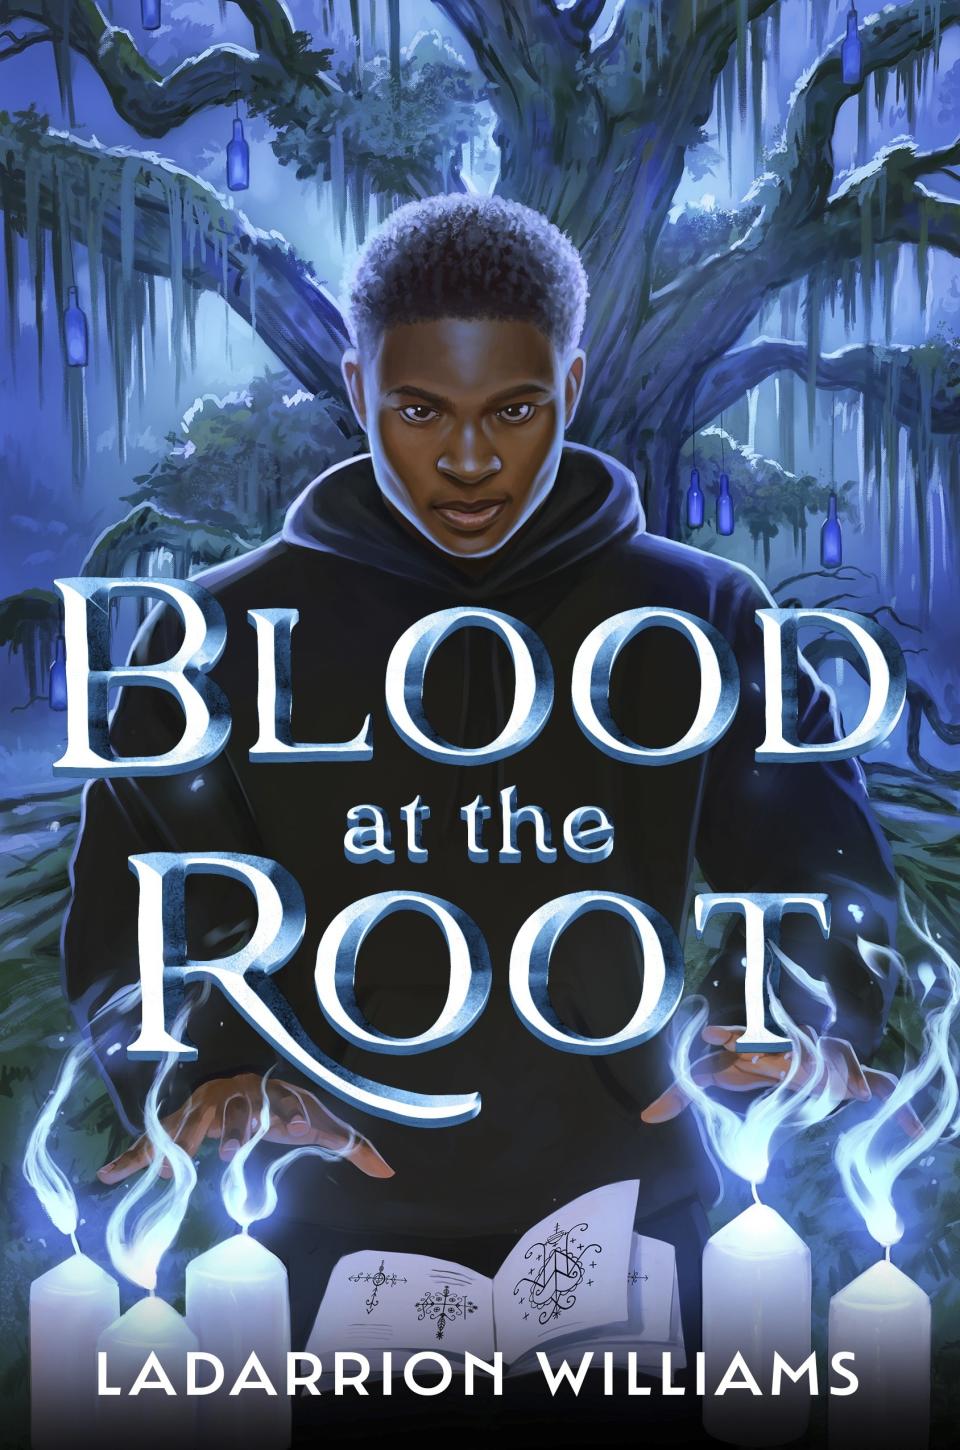 This cover image released by Labyrinth Road shows "Blood of the Root" by LaDarrion Williams. (Labyrinth Road via AP)